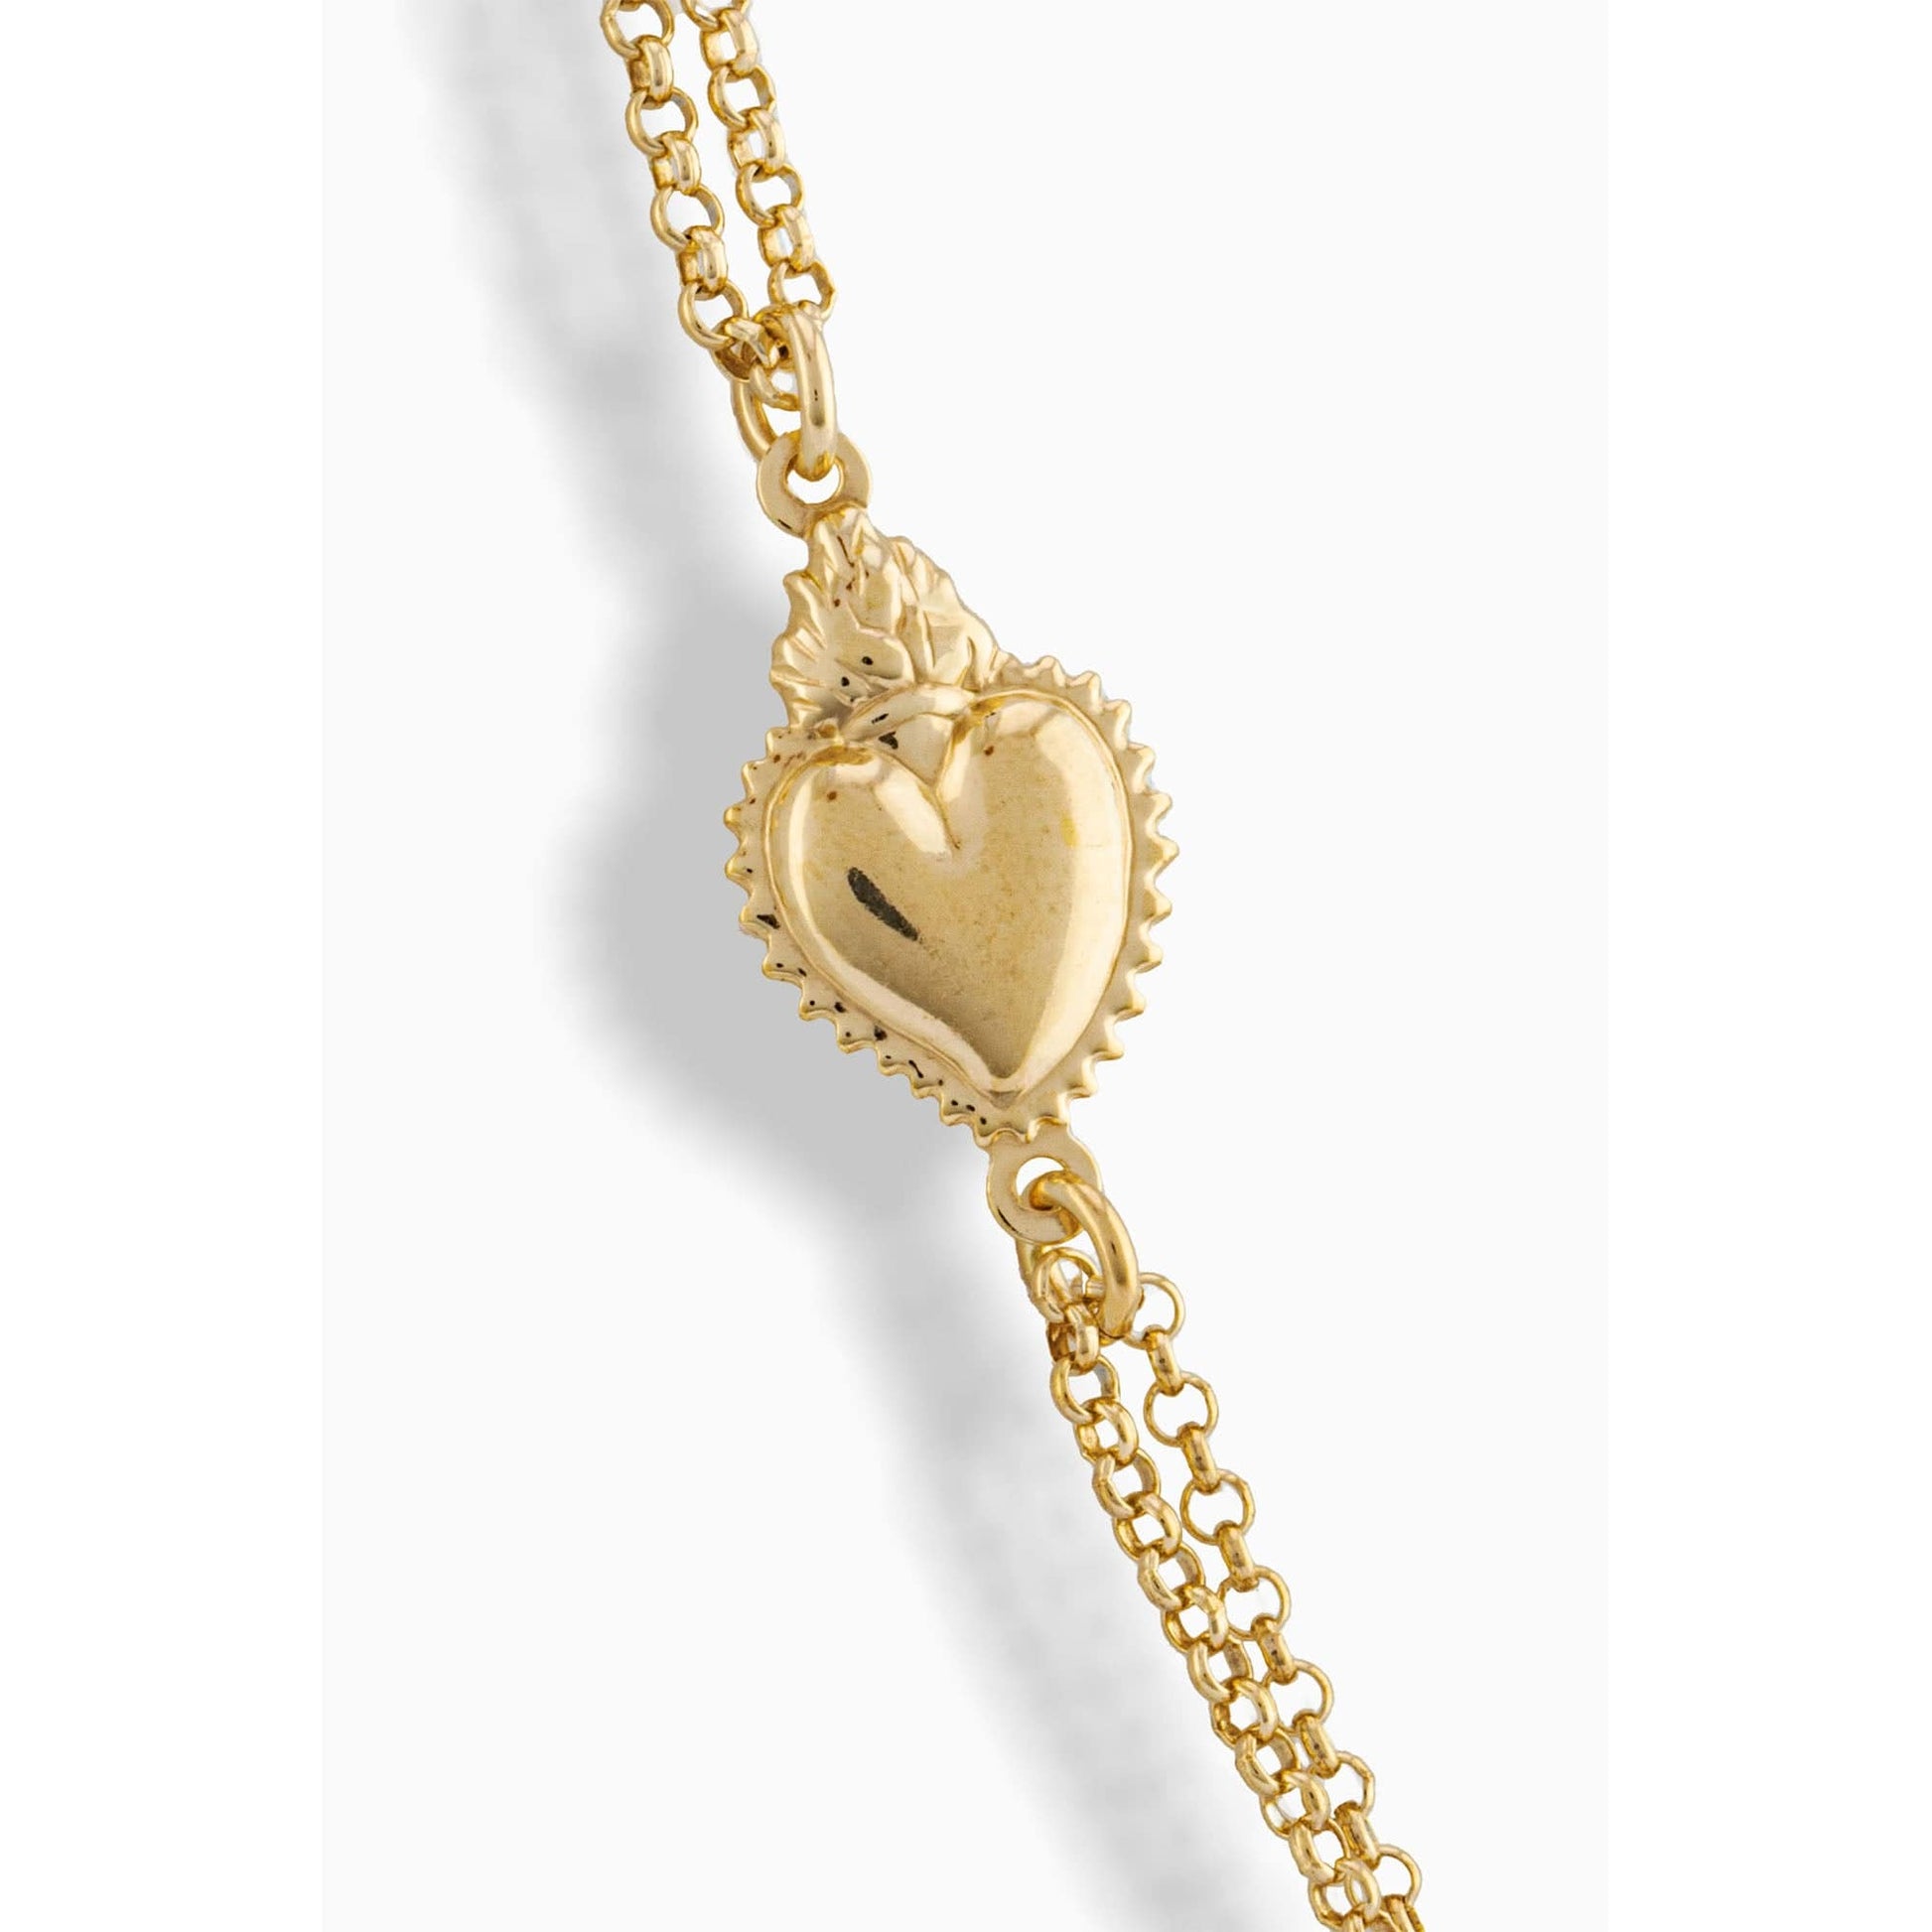 MONDO CATTOLICO Prayer Beads Gold / Cm 46 (18.1 in) STERLING SILVER PLATED SACRED HEART 3 MM BLACK BEADS NECKLACE